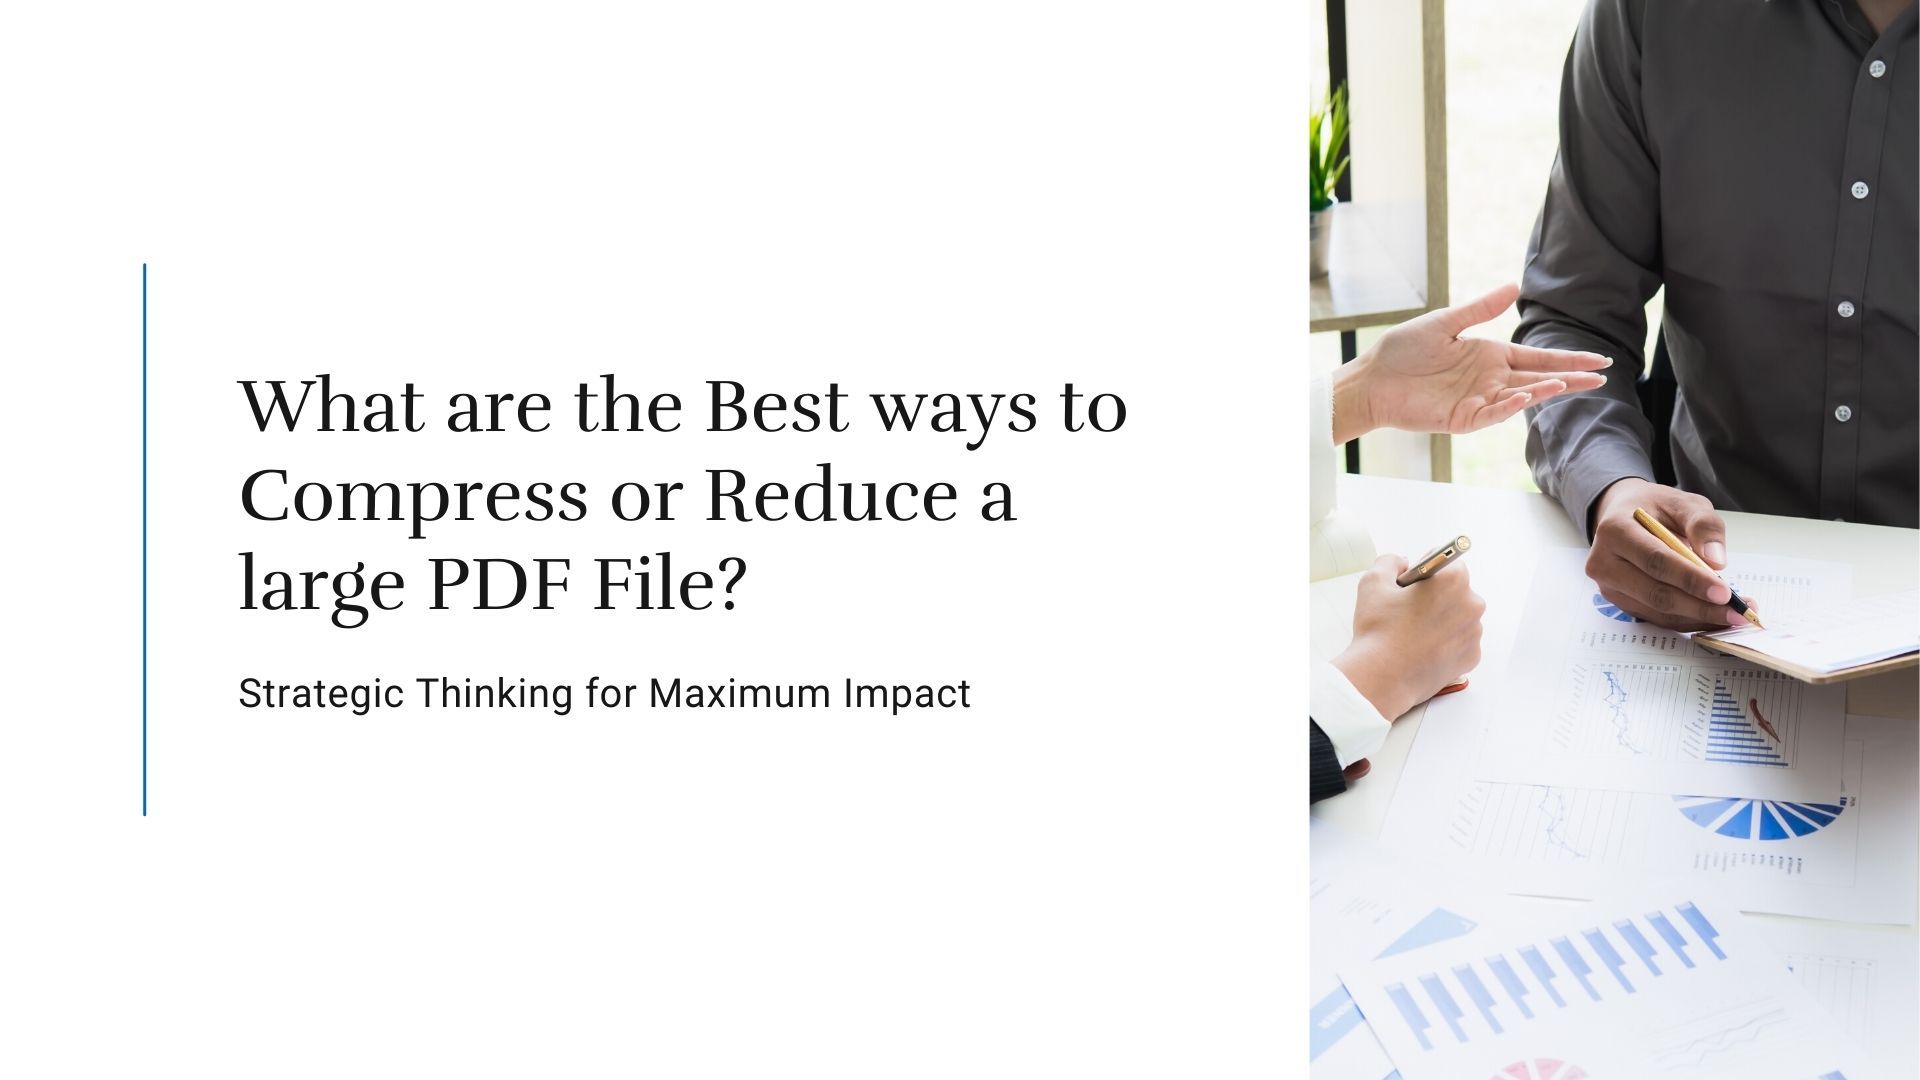  Best ways to Compress or Reduce a large PDF File